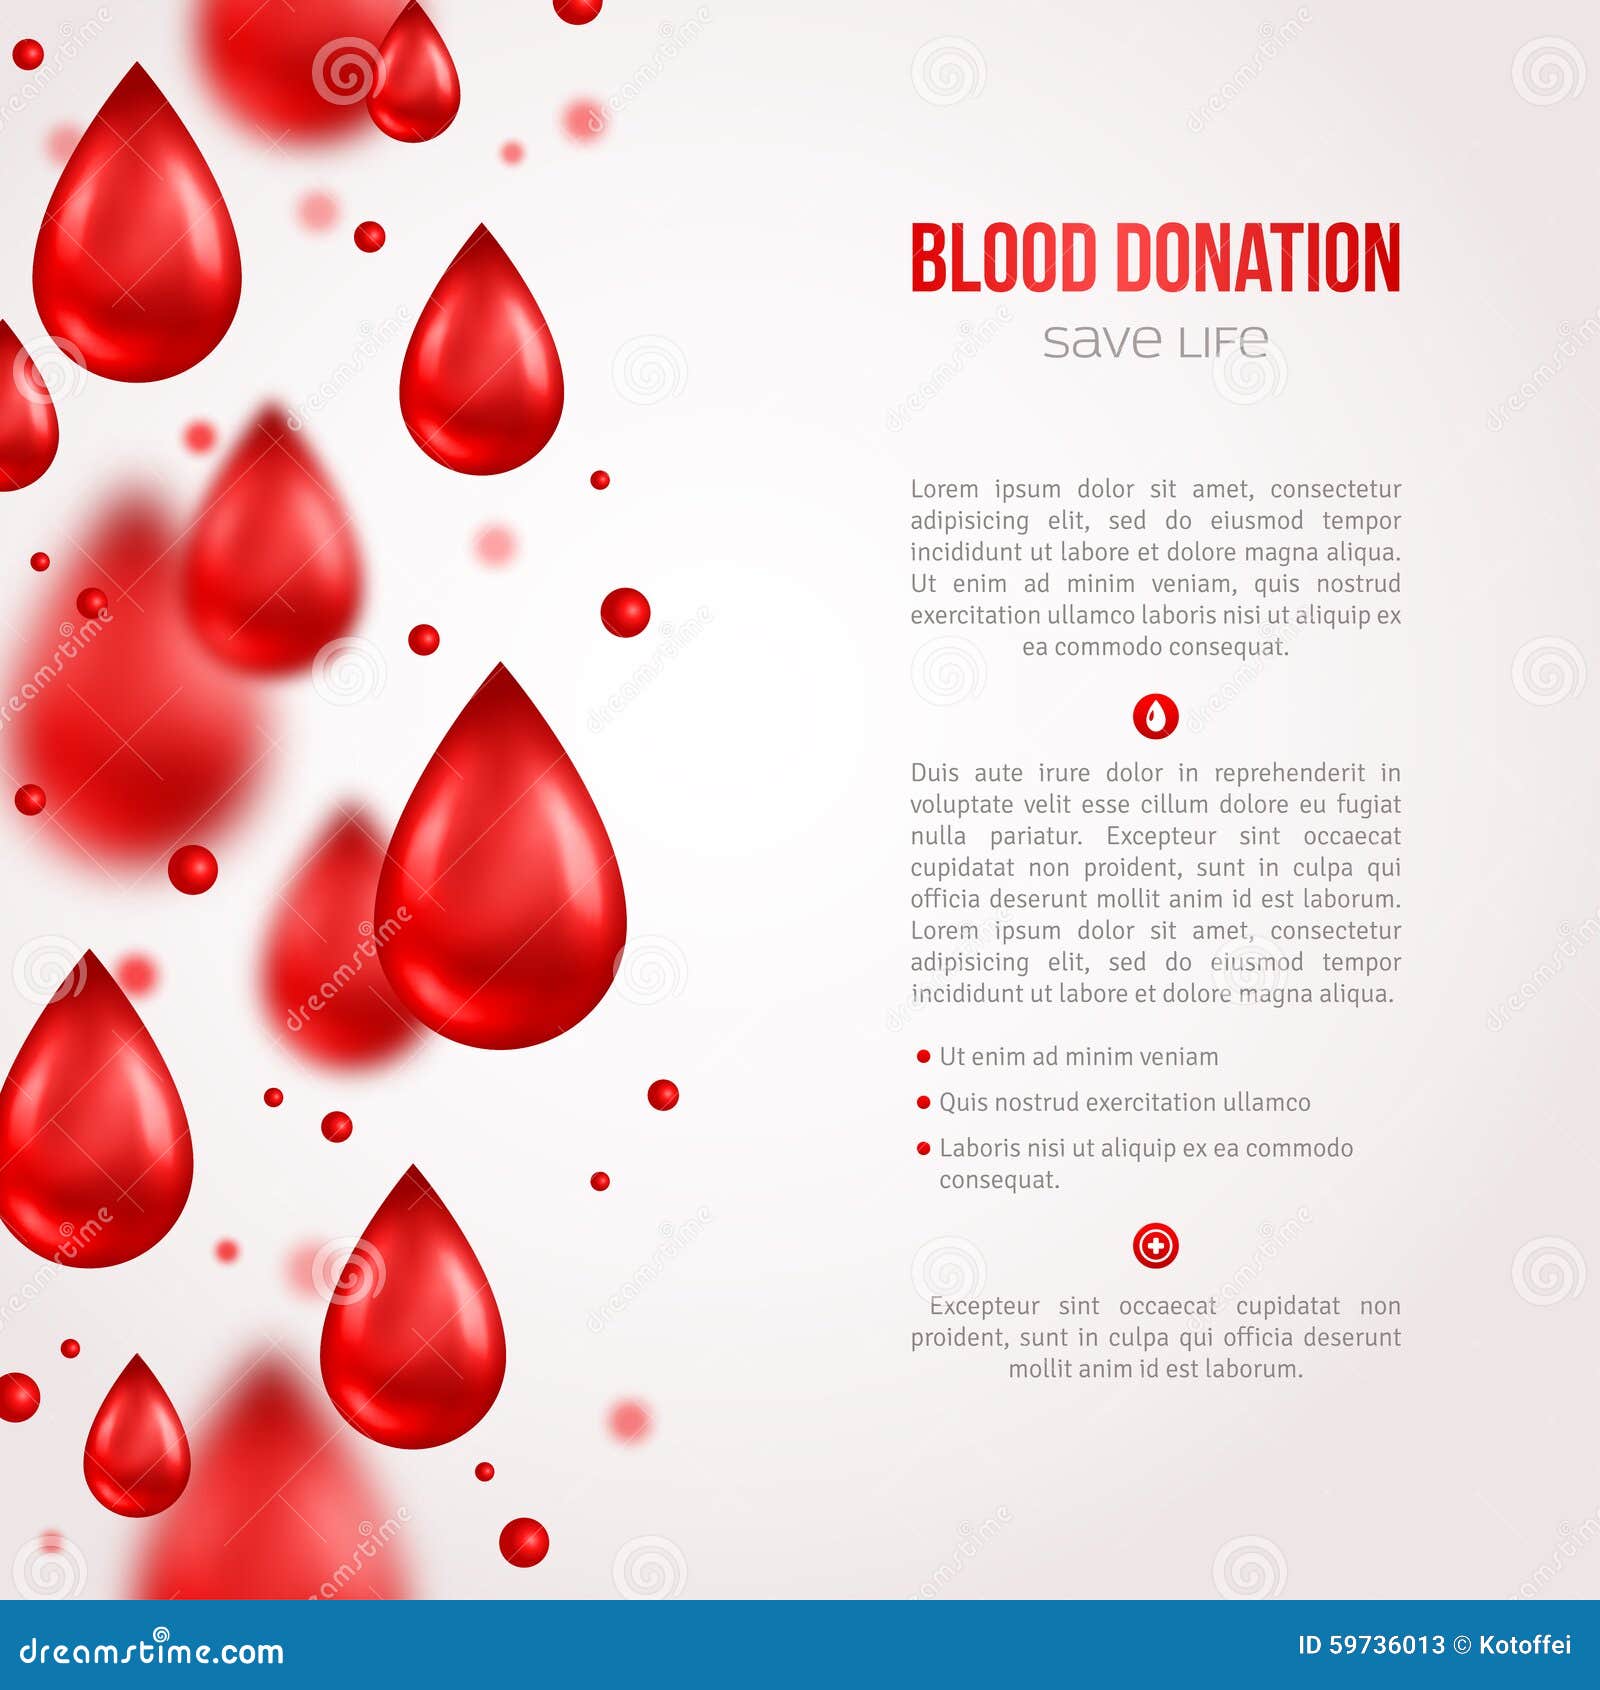 donor poster or flyer. blood donation lifesaving